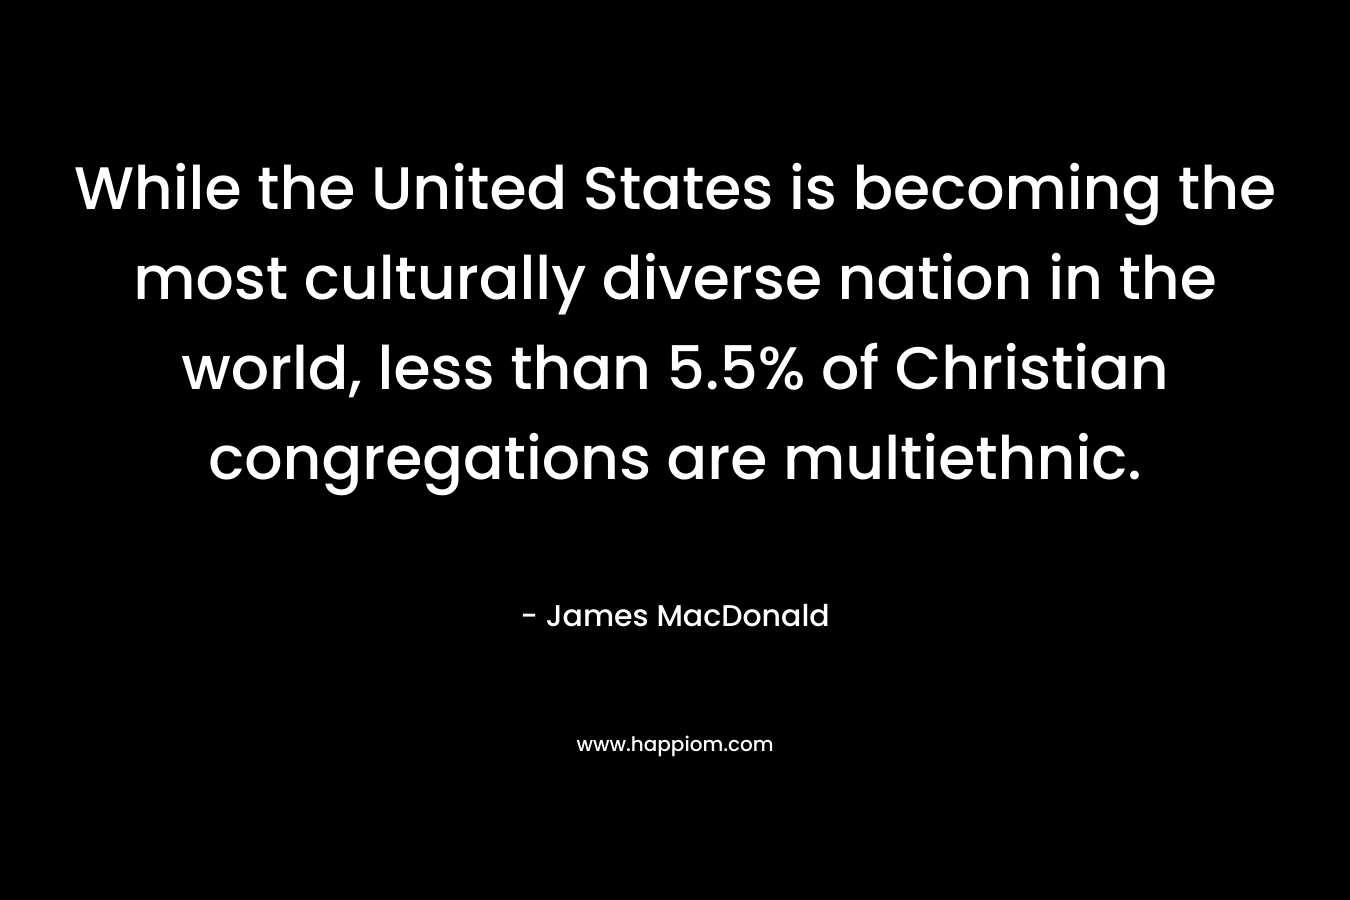 While the United States is becoming the most culturally diverse nation in the world, less than 5.5% of Christian congregations are multiethnic. – James MacDonald